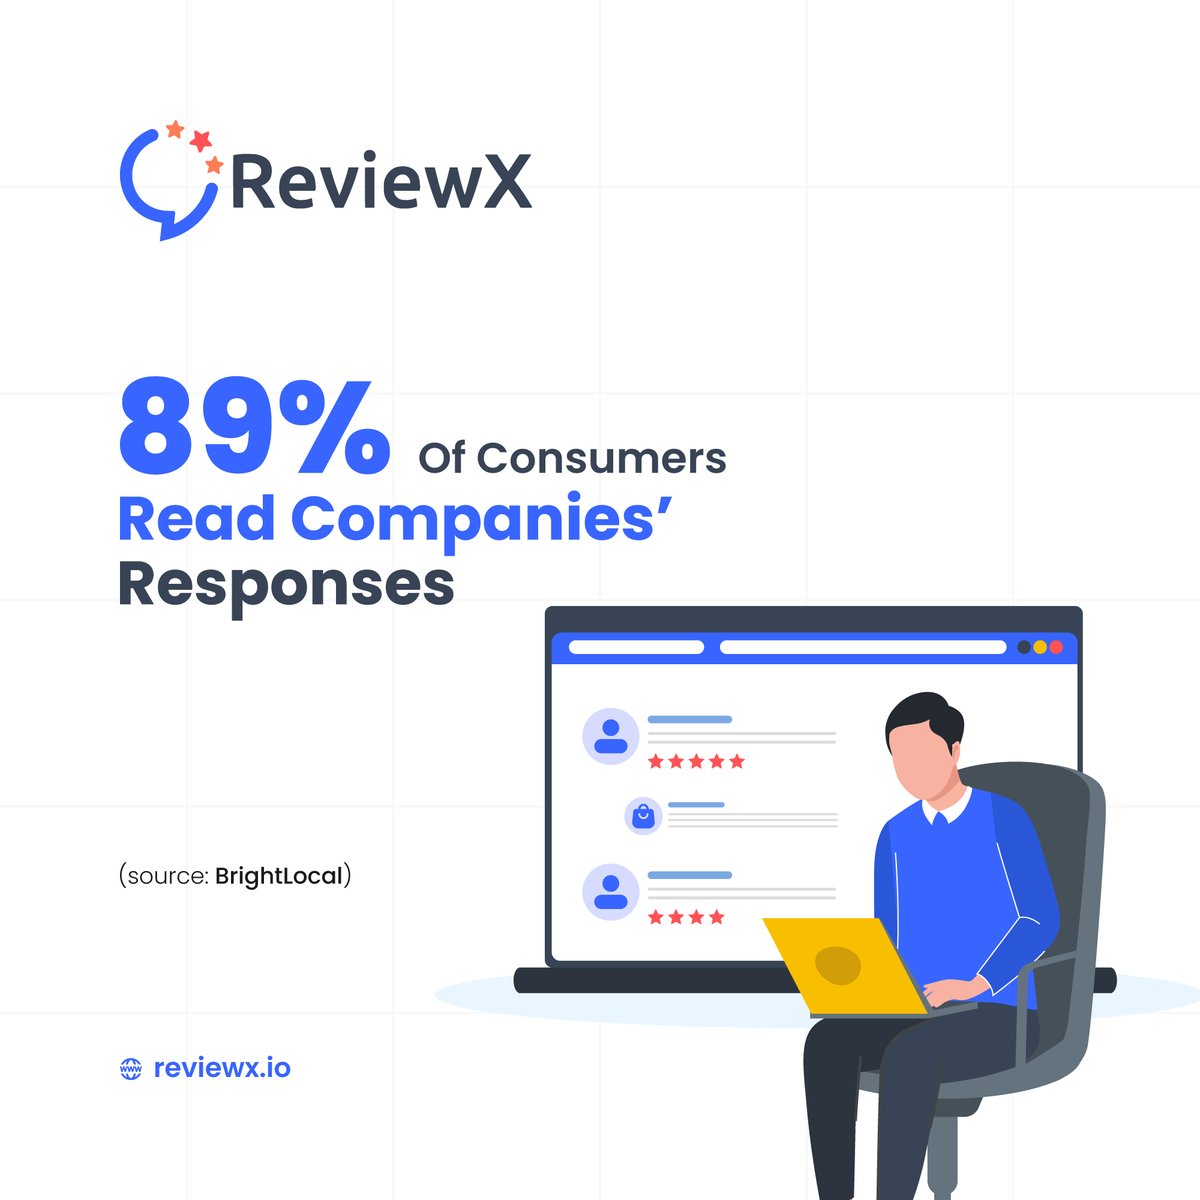 Don't forget to respond to your customer reviews.

#ReviewX #Facts #WordPressPlugin #WooCommerceReviews #wordpressreviewplugin #reviews #ecommerce #ecommercefacts